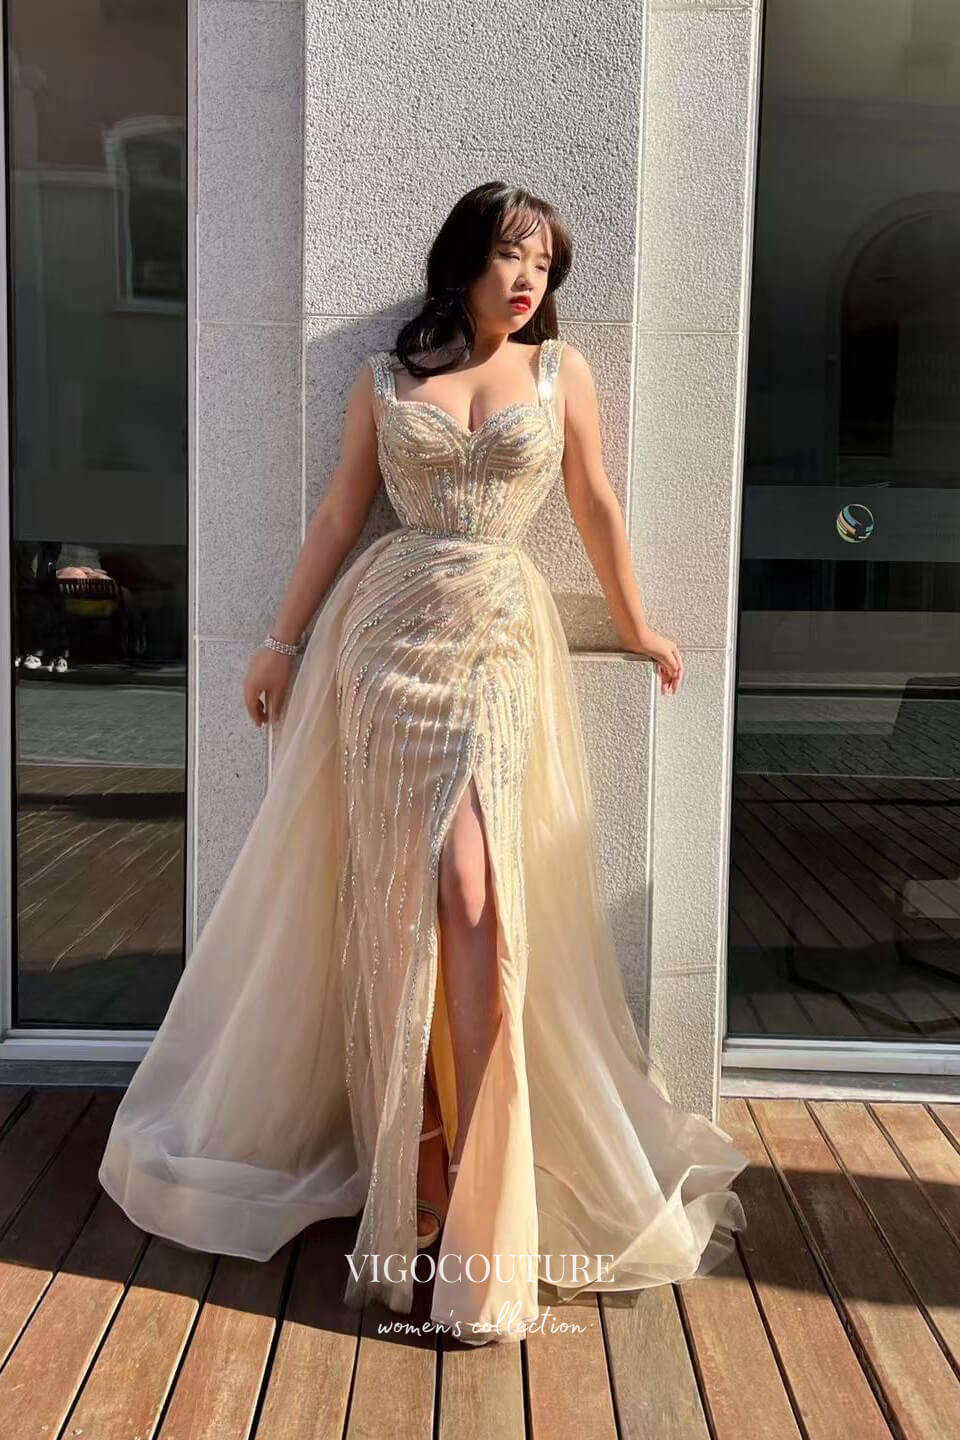 Modest / Simple Champagne Gold Satin Prom Dresses 2022 A-Line / Princess  Square Neckline Pearl Puffy Short Sleeve Backless Floor-Length / Long Formal  Dresses